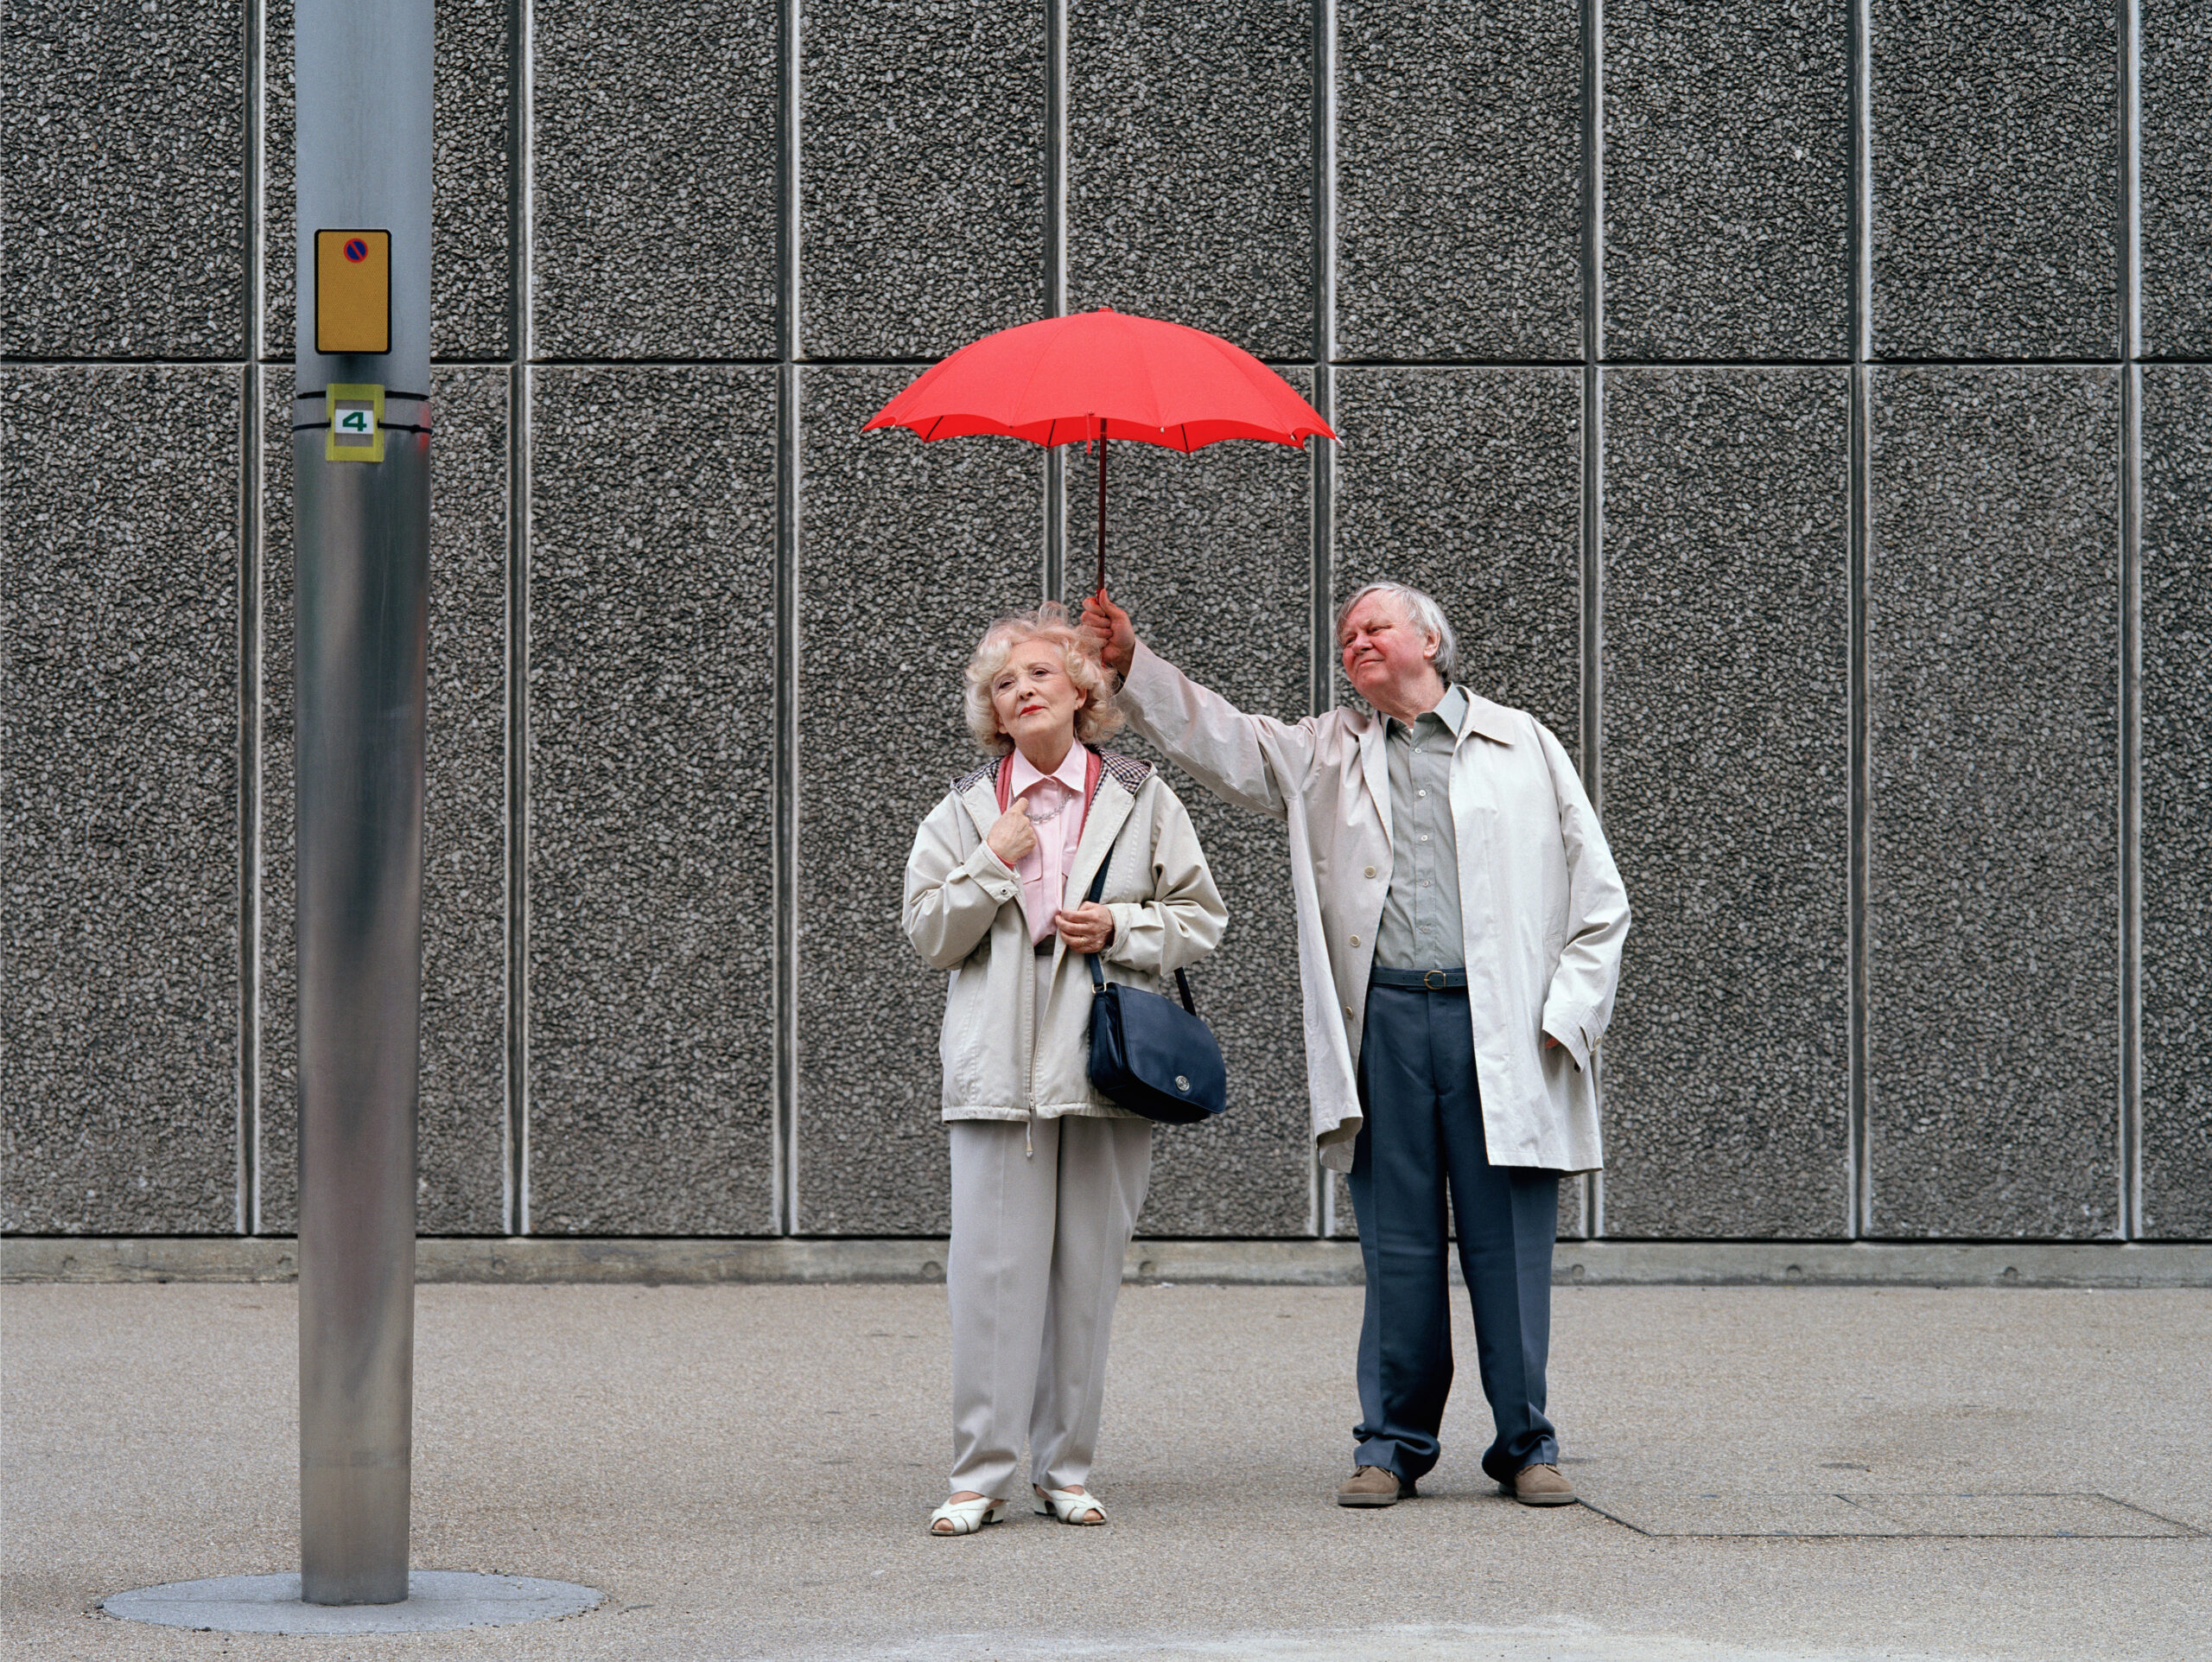 Senior man holding red umbrella over woman, standing on pavement